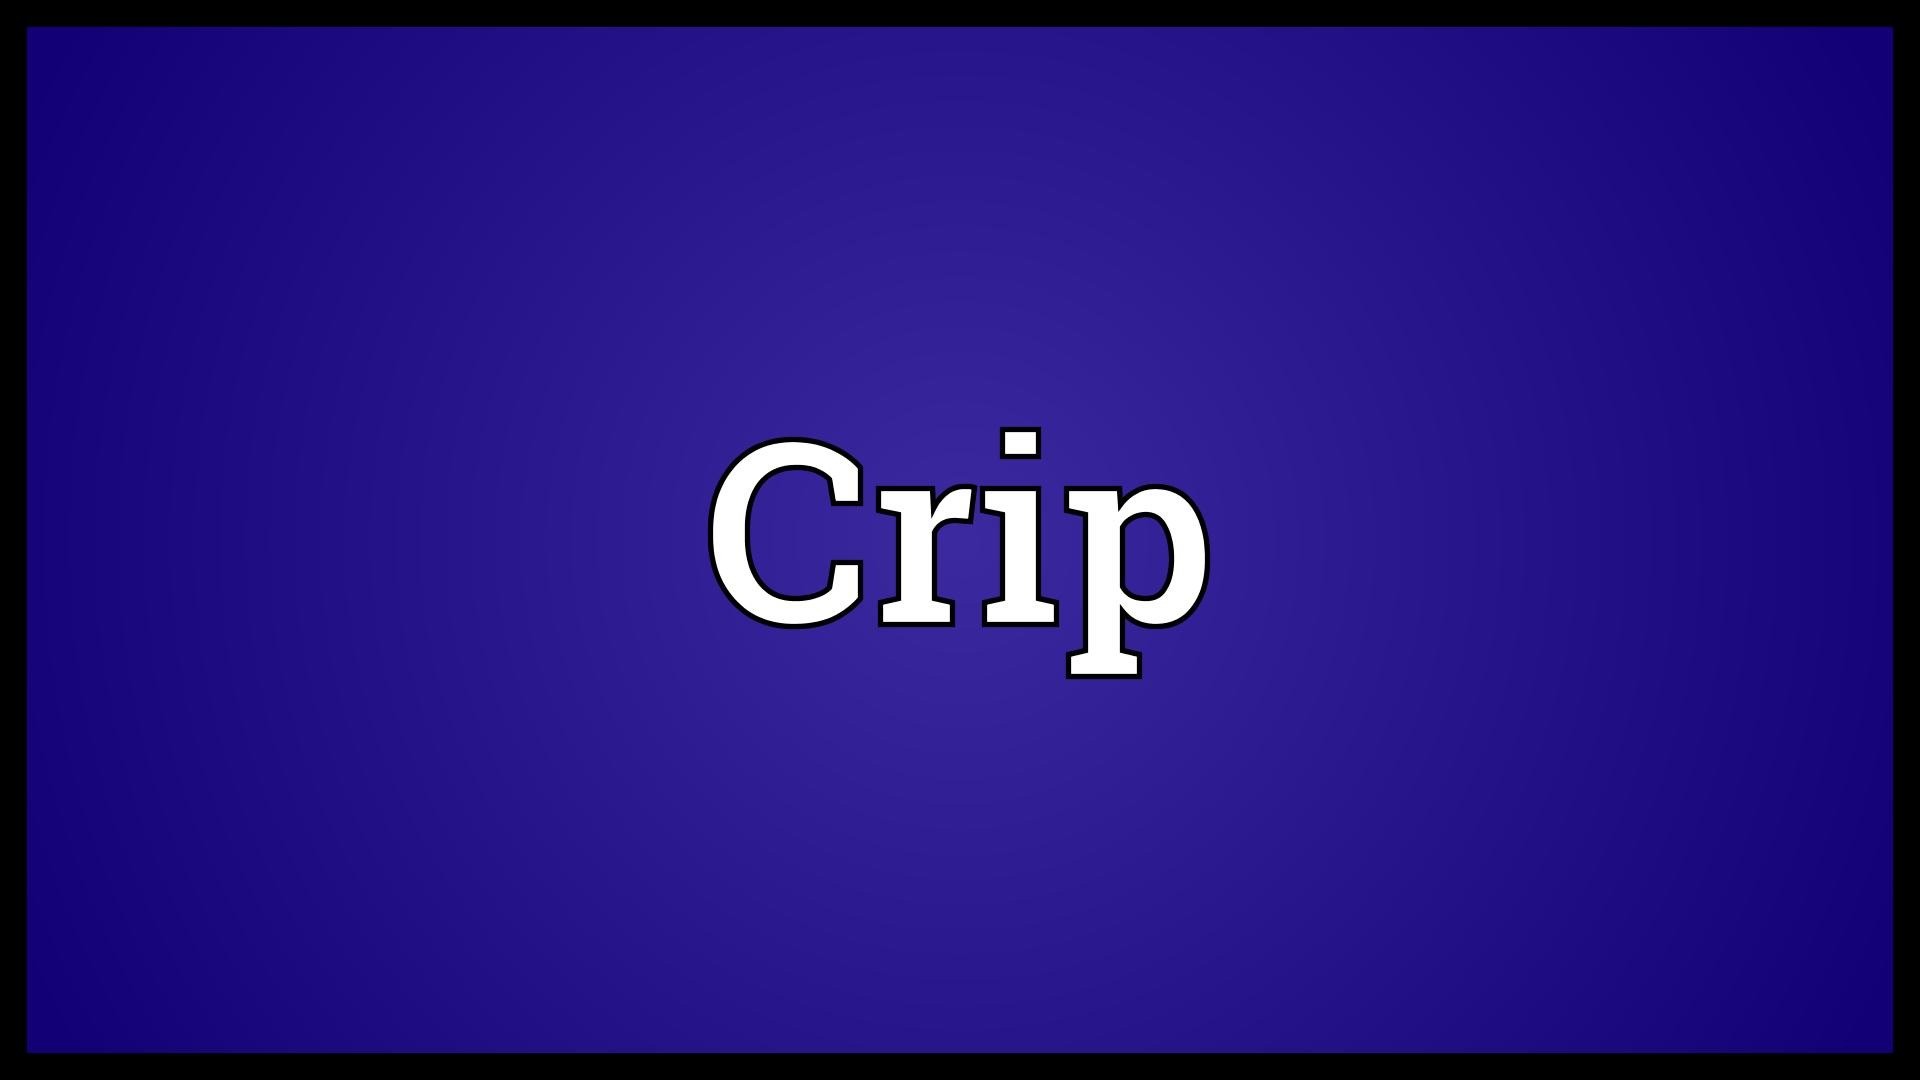 Crip Meaning